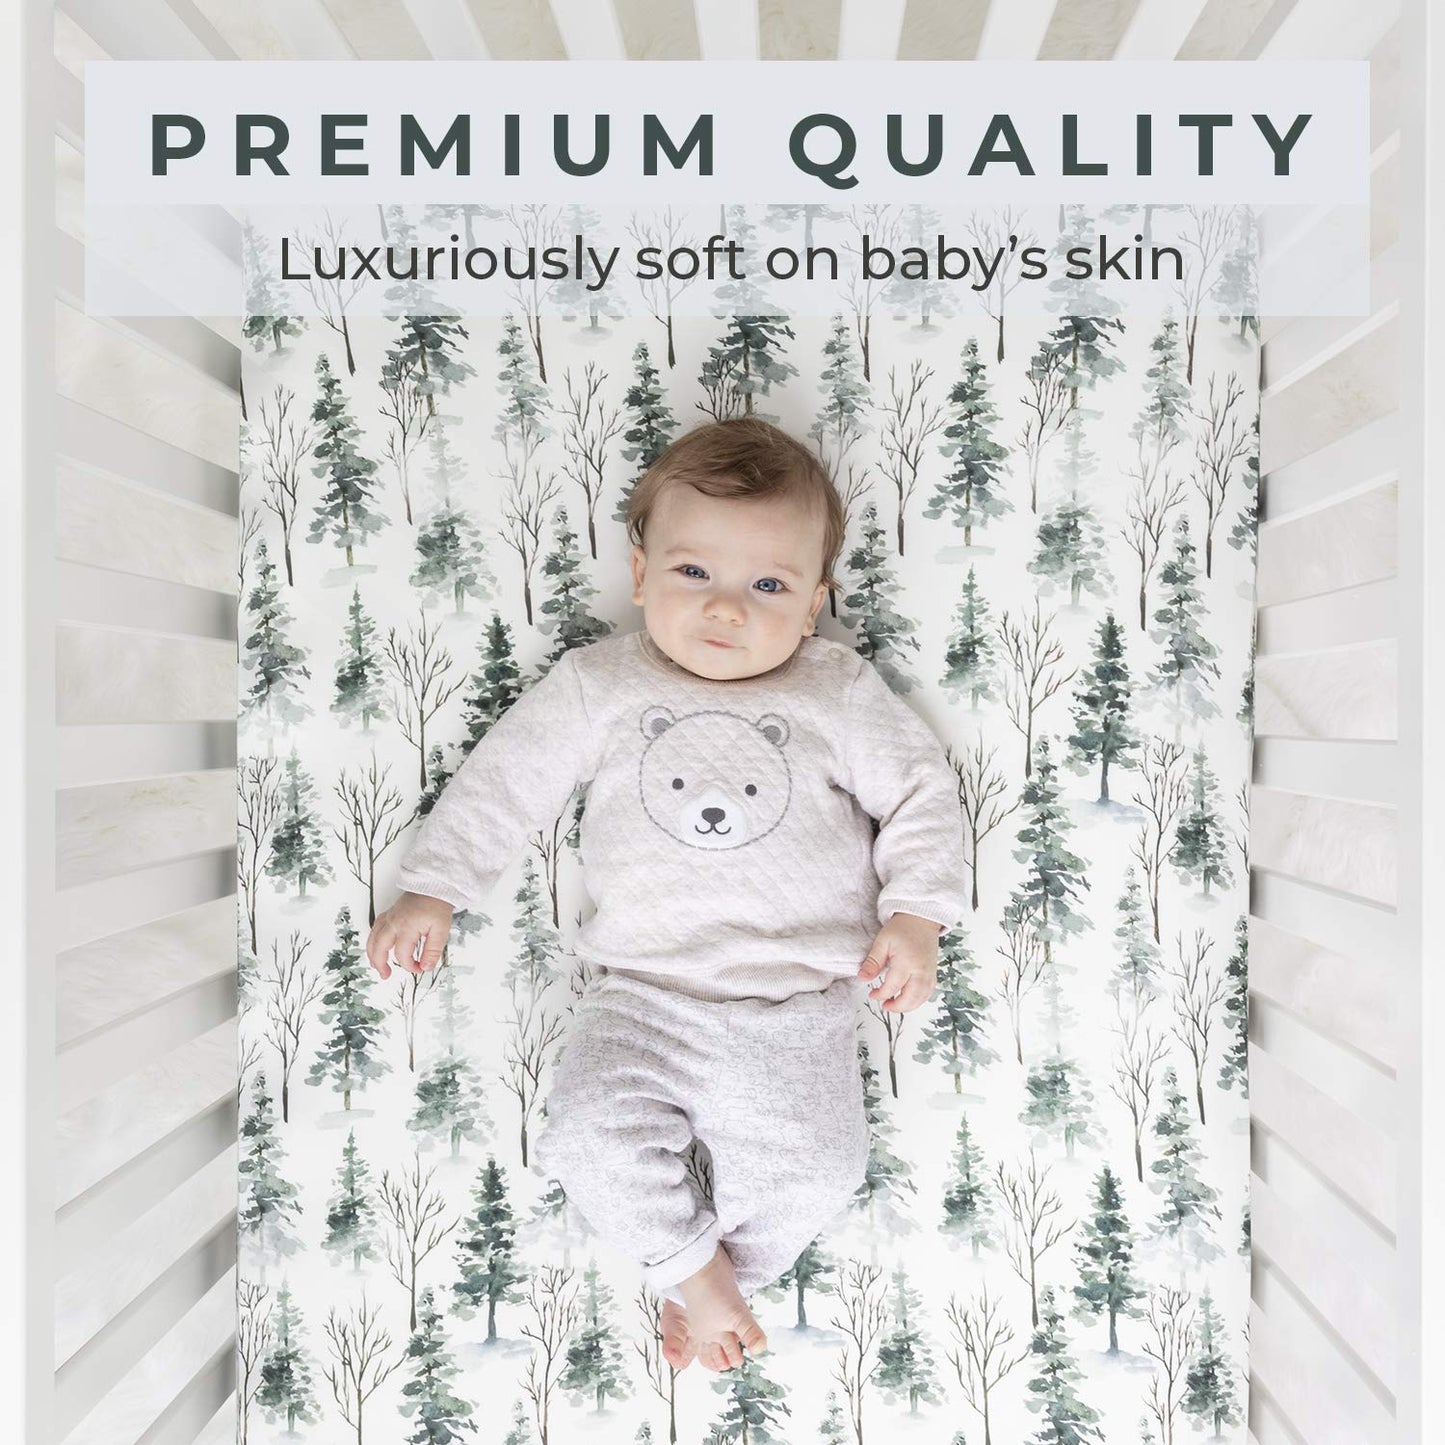 Pobi Baby - 2 Pack Premium Fitted Crib Sheets for Standard Crib Mattress - Ultra-Soft Cotton Blend, Stylish Animal Woodland Pattern, Safe and Snug for Baby (Magical)